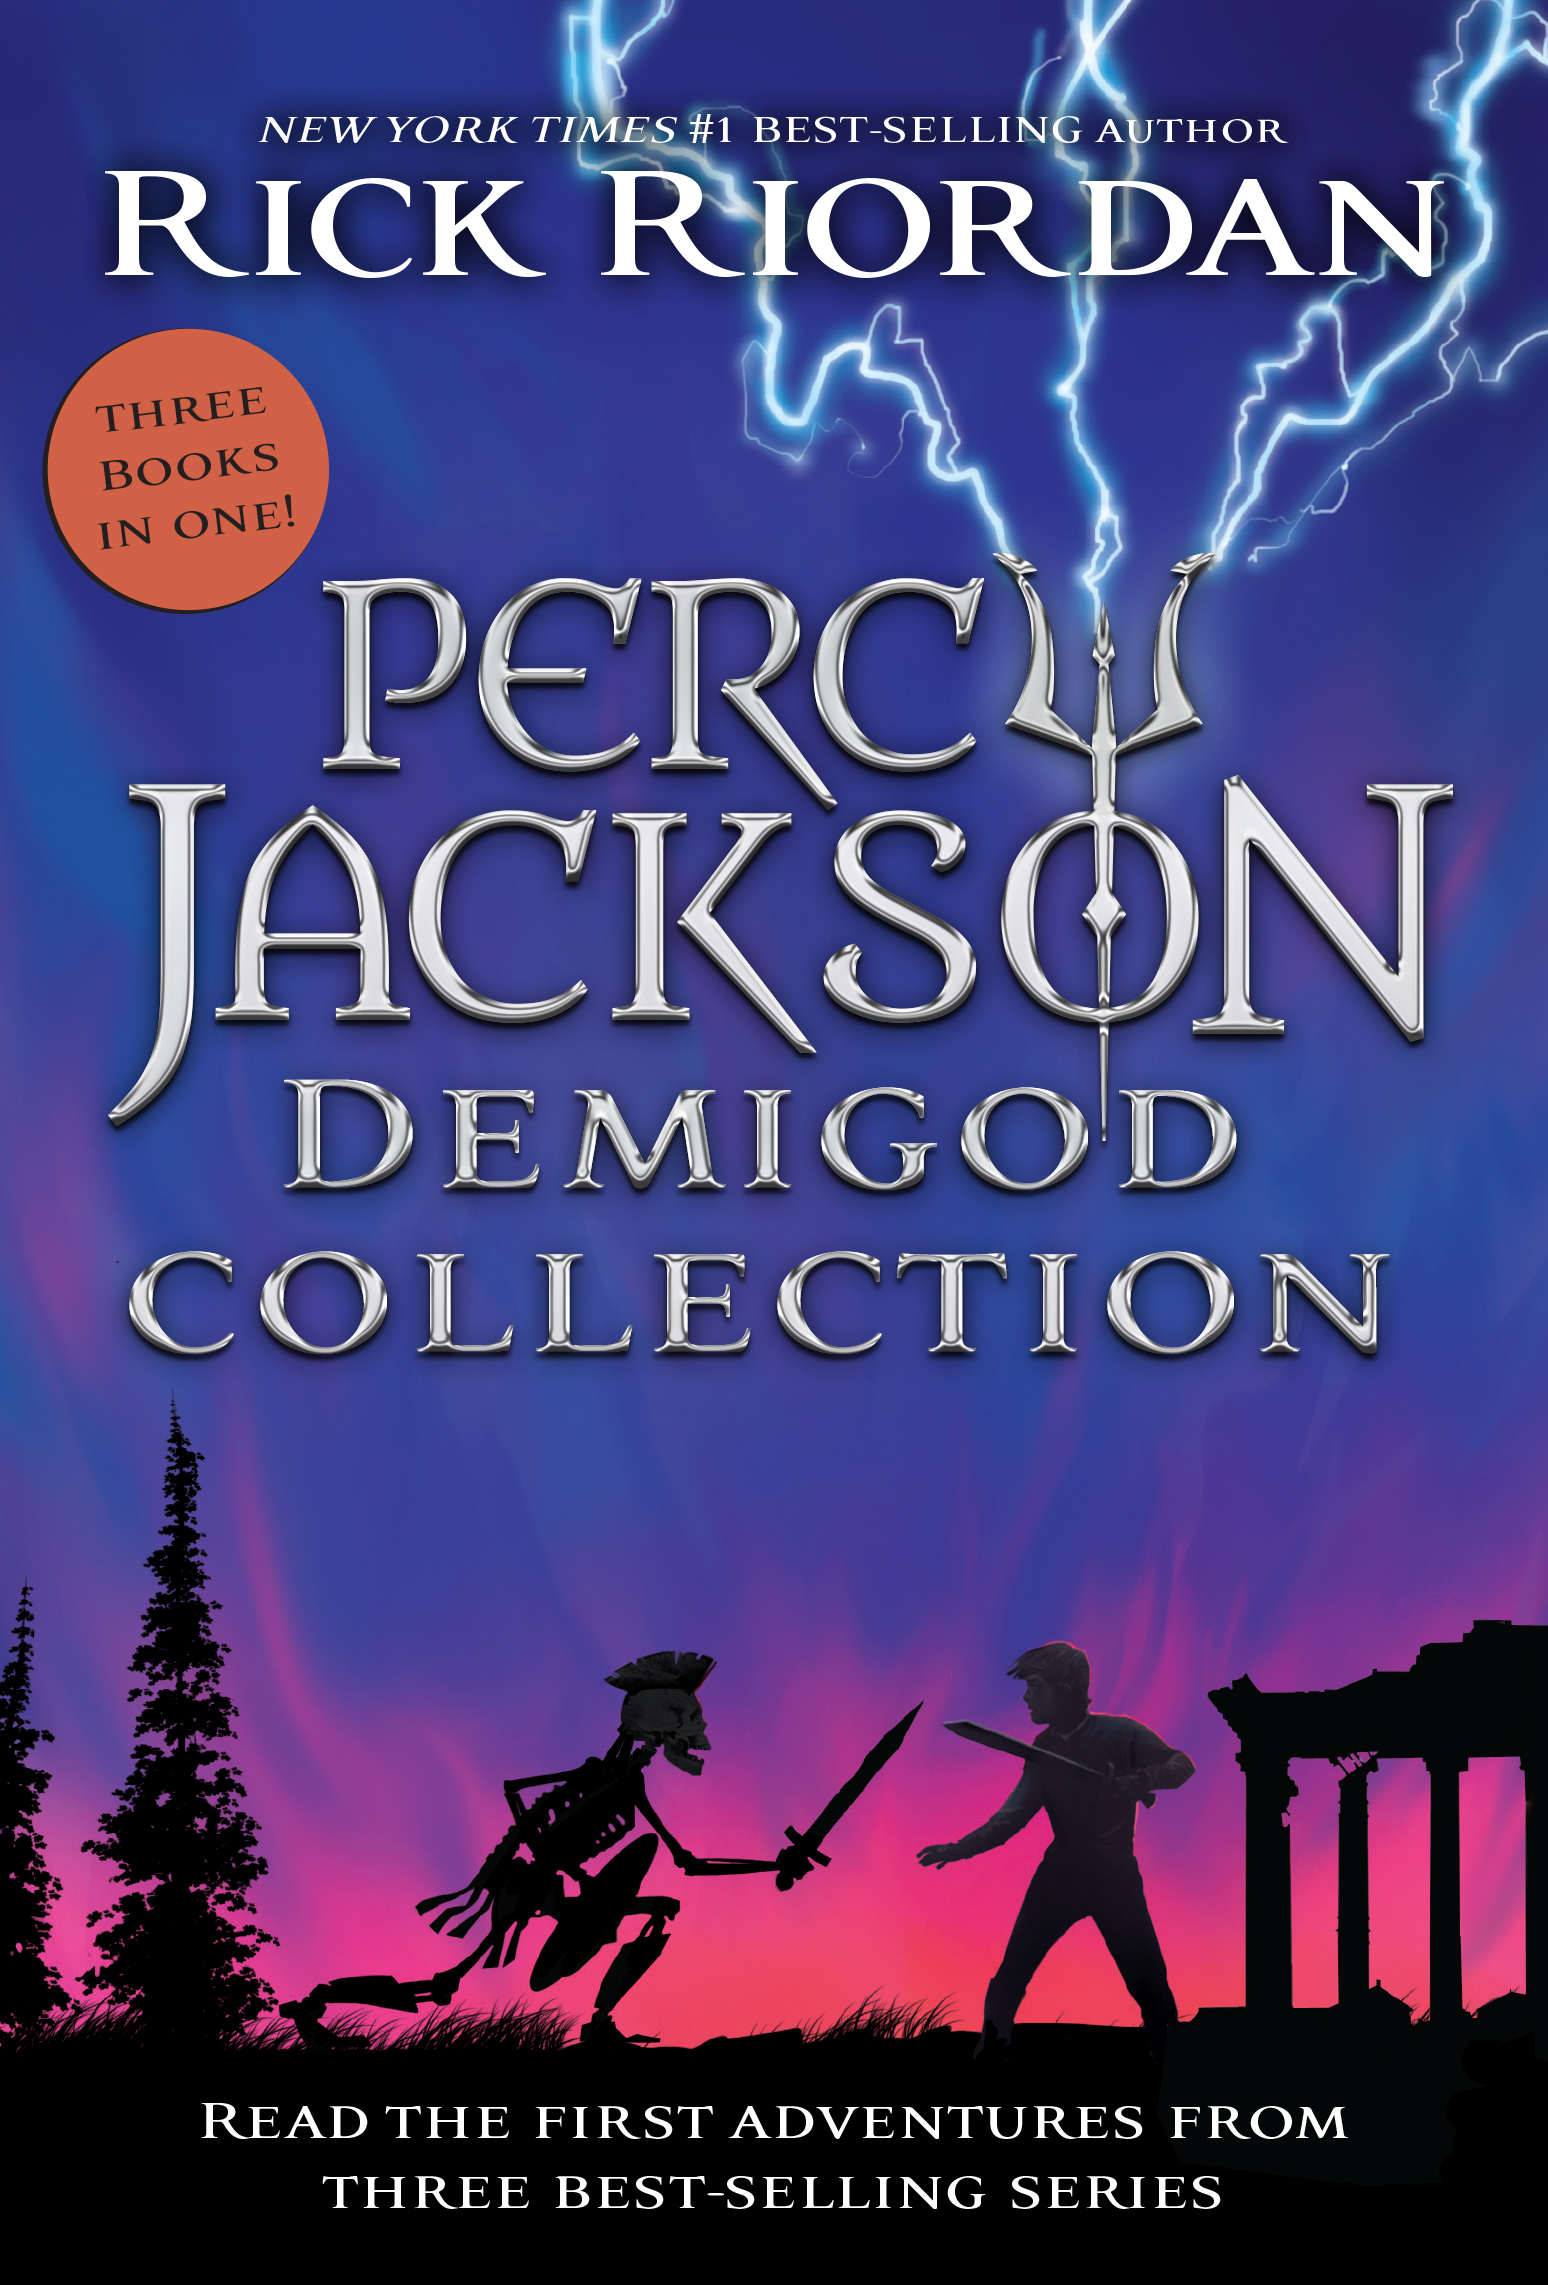 From Percy Jackson: Camp Half-Blood Confidential-An Official Rick Riordan  Companion Book: Your Real Guide to the Demigod Training Camp (Trials of